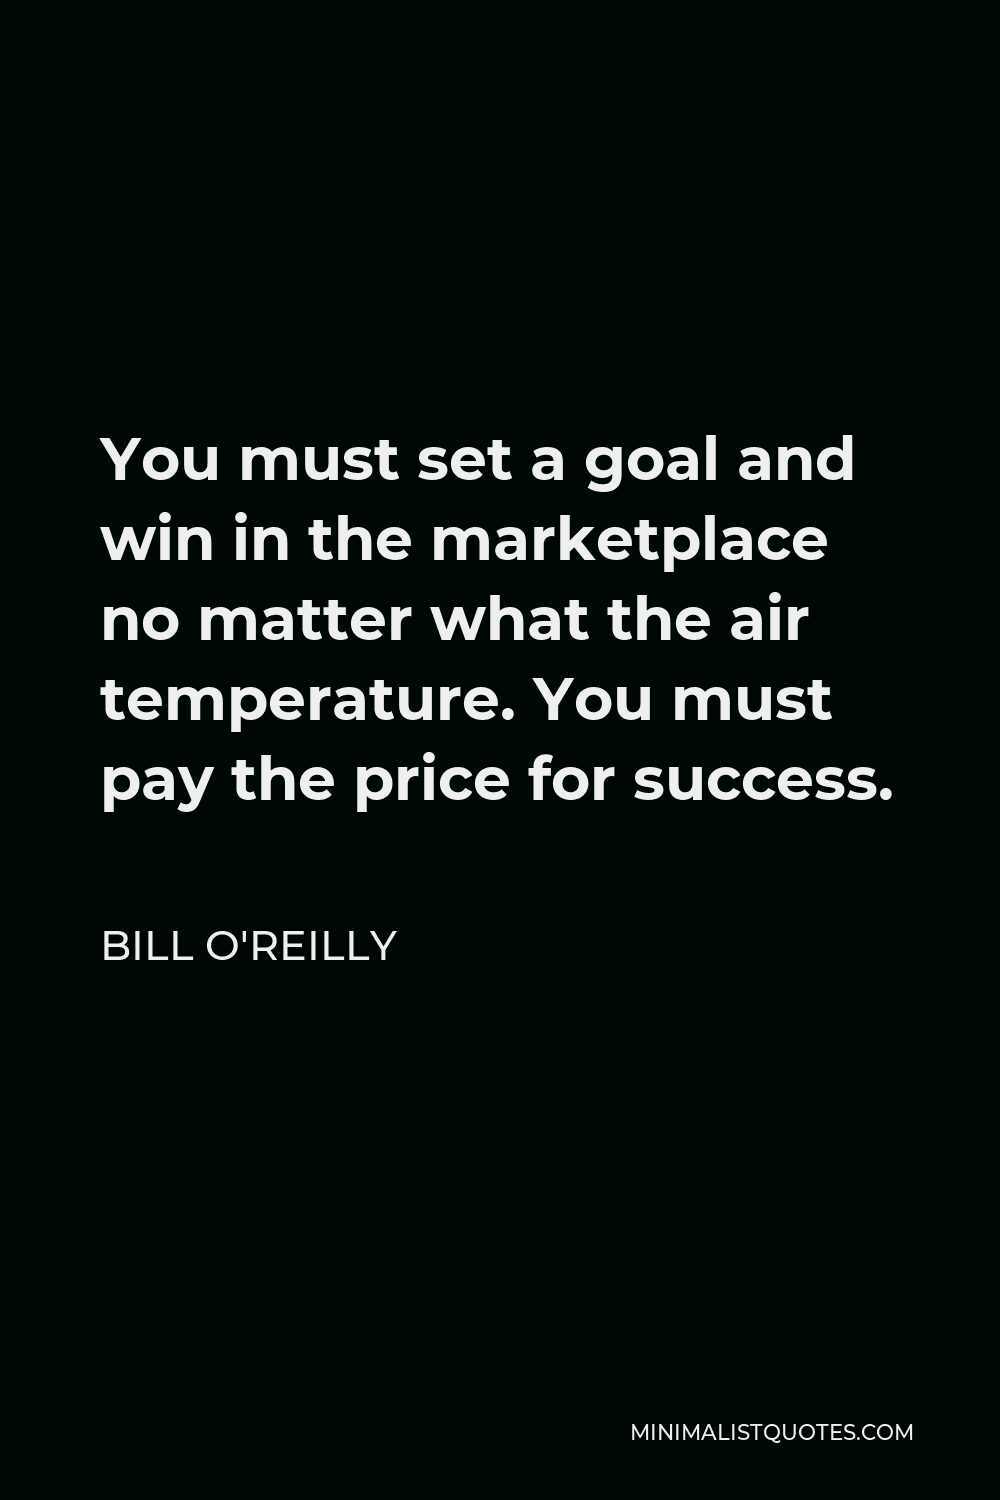 Bill O'Reilly Quote - You must set a goal and win in the marketplace no matter what the air temperature. You must pay the price for success.